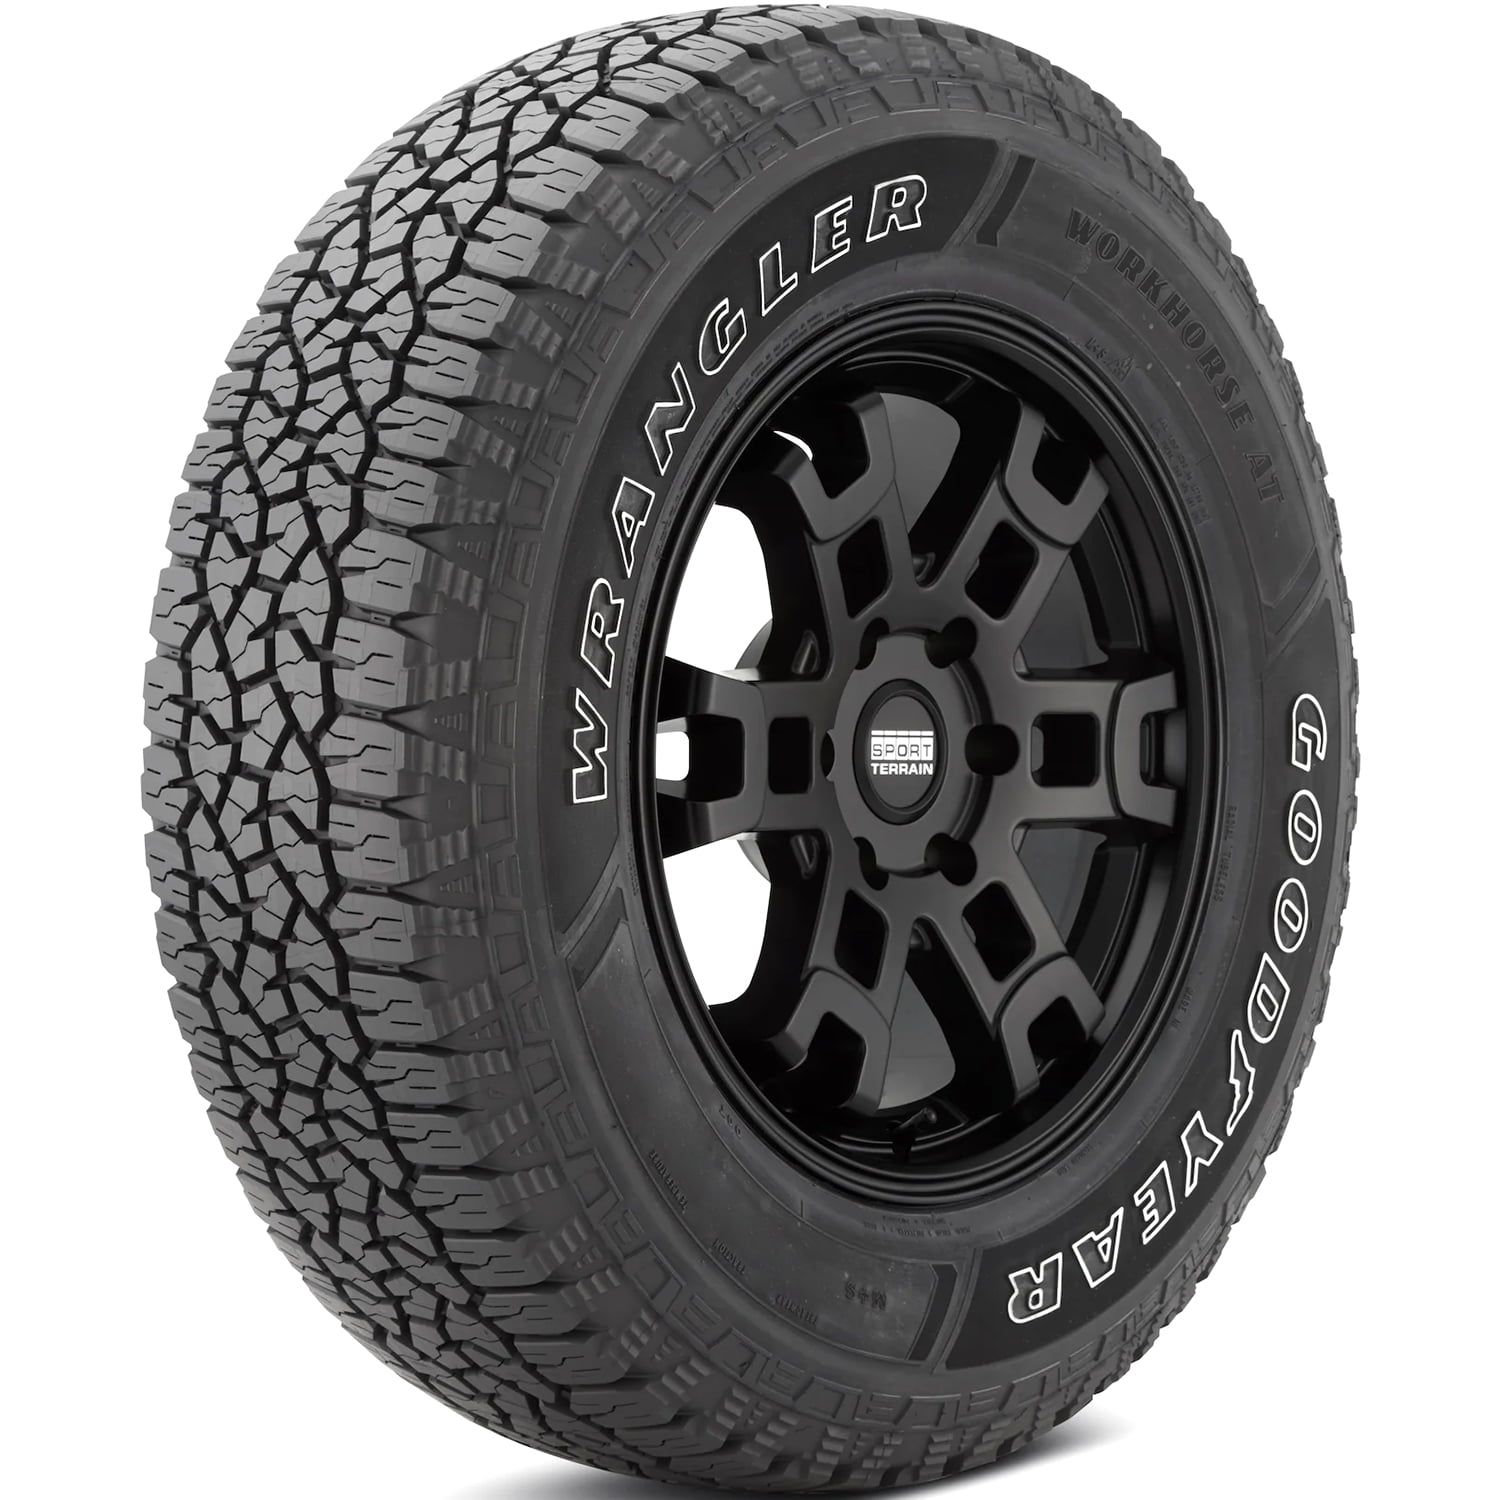 Goodyear Wrangler Workhorse AT LT 265/75R16 Load E 10 Ply All Terrain Tire  